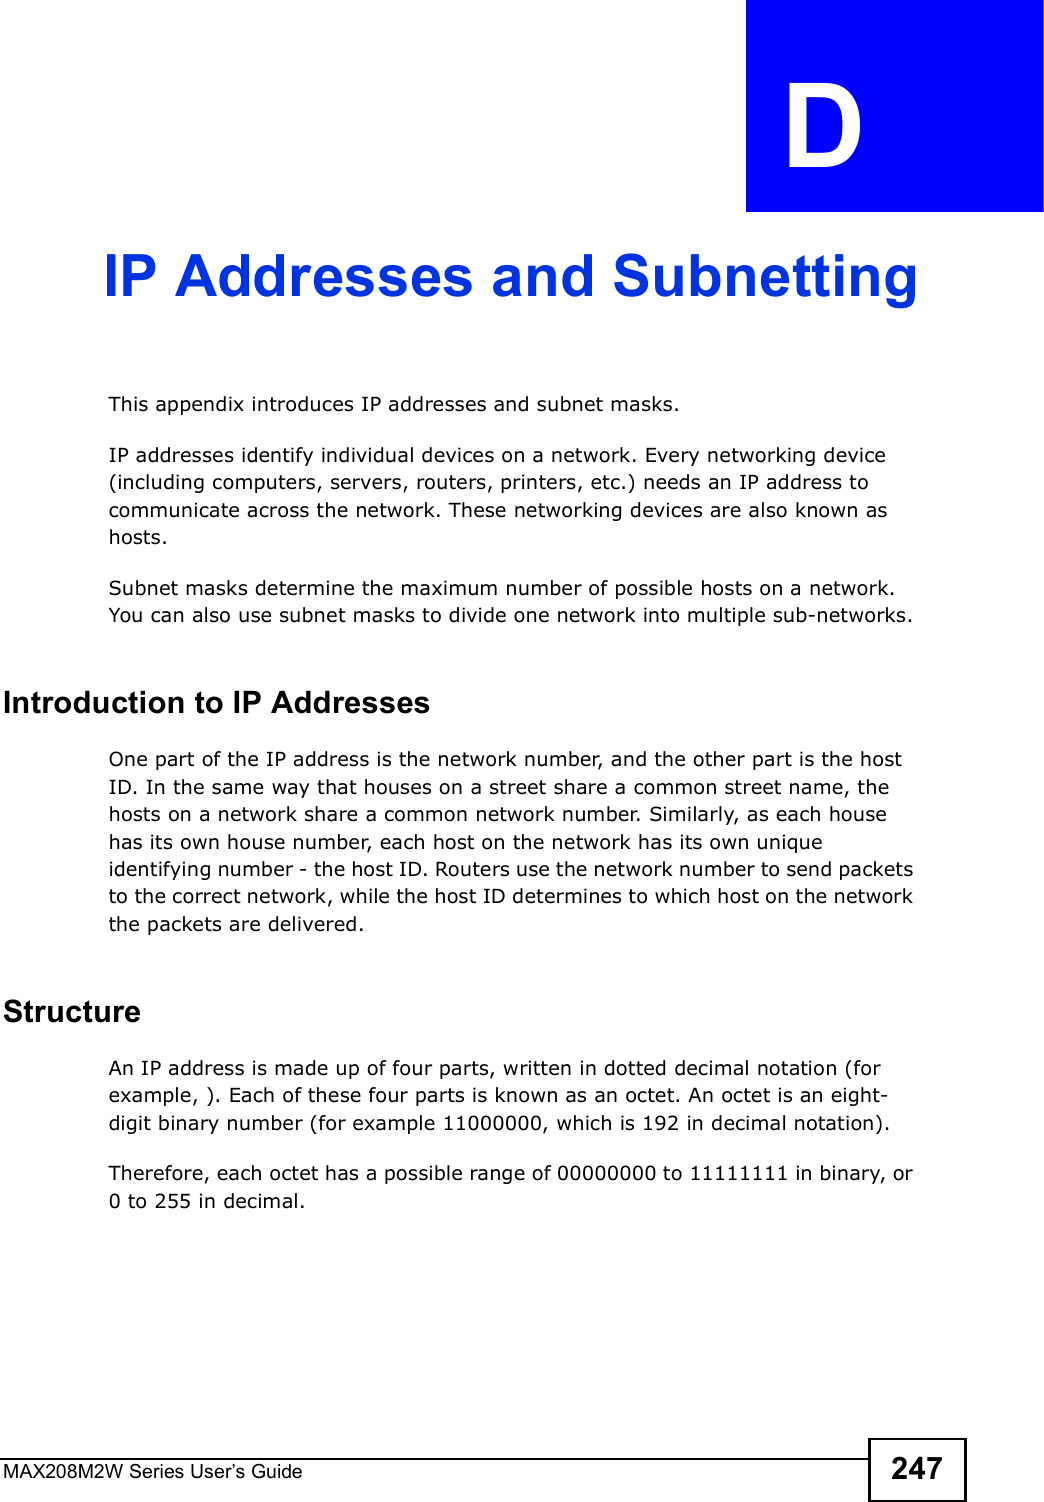 MAX208M2W Series User s Guide 247APPENDIX  D IP Addresses and SubnettingThis appendix introduces IP addresses and subnet masks. IP addresses identify individual devices on a network. Every networking device (including computers, servers, routers, printers, etc.) needs an IP address to communicate across the network. These networking devices are also known as hosts.Subnet masks determine the maximum number of possible hosts on a network. You can also use subnet masks to divide one network into multiple sub-networks.Introduction to IP AddressesOne part of the IP address is the network number, and the other part is the host ID. In the same way that houses on a street share a common street name, the hosts on a network share a common network number. Similarly, as each house has its own house number, each host on the network has its own unique identifying number - the host ID. Routers use the network number to send packets to the correct network, while the host ID determines to which host on the network the packets are delivered.StructureAn IP address is made up of four parts, written in dotted decimal notation (for example, ). Each of these four parts is known as an octet. An octet is an eight-digit binary number (for example 11000000, which is 192 in decimal notation). Therefore, each octet has a possible range of 00000000 to 11111111 in binary, or 0 to 255 in decimal.